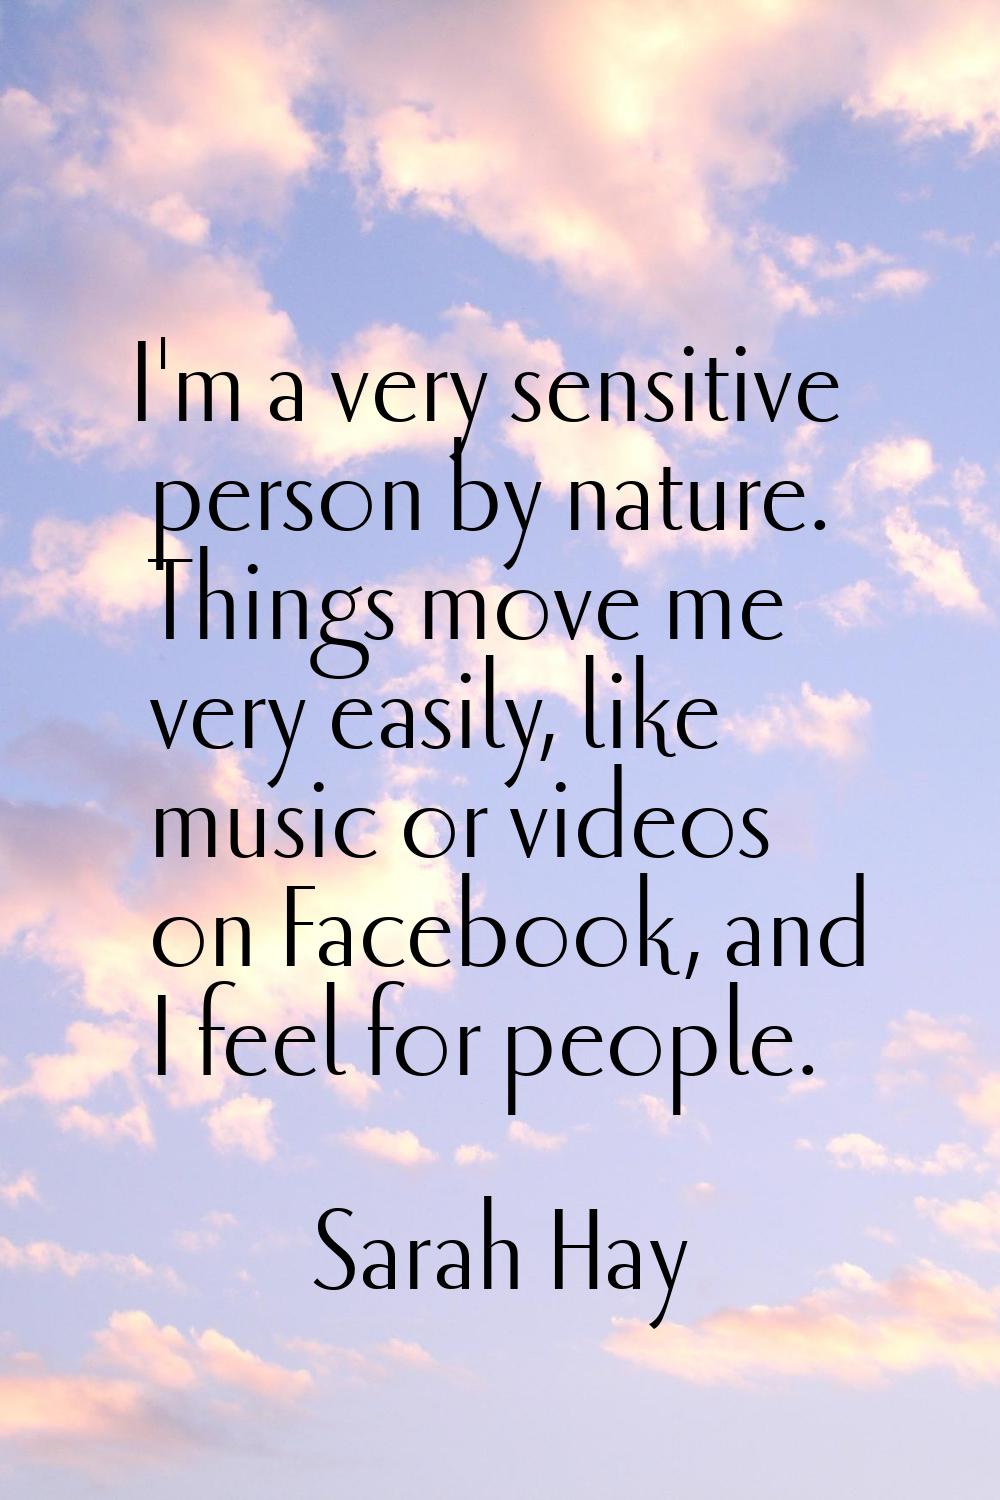 I'm a very sensitive person by nature. Things move me very easily, like music or videos on Facebook